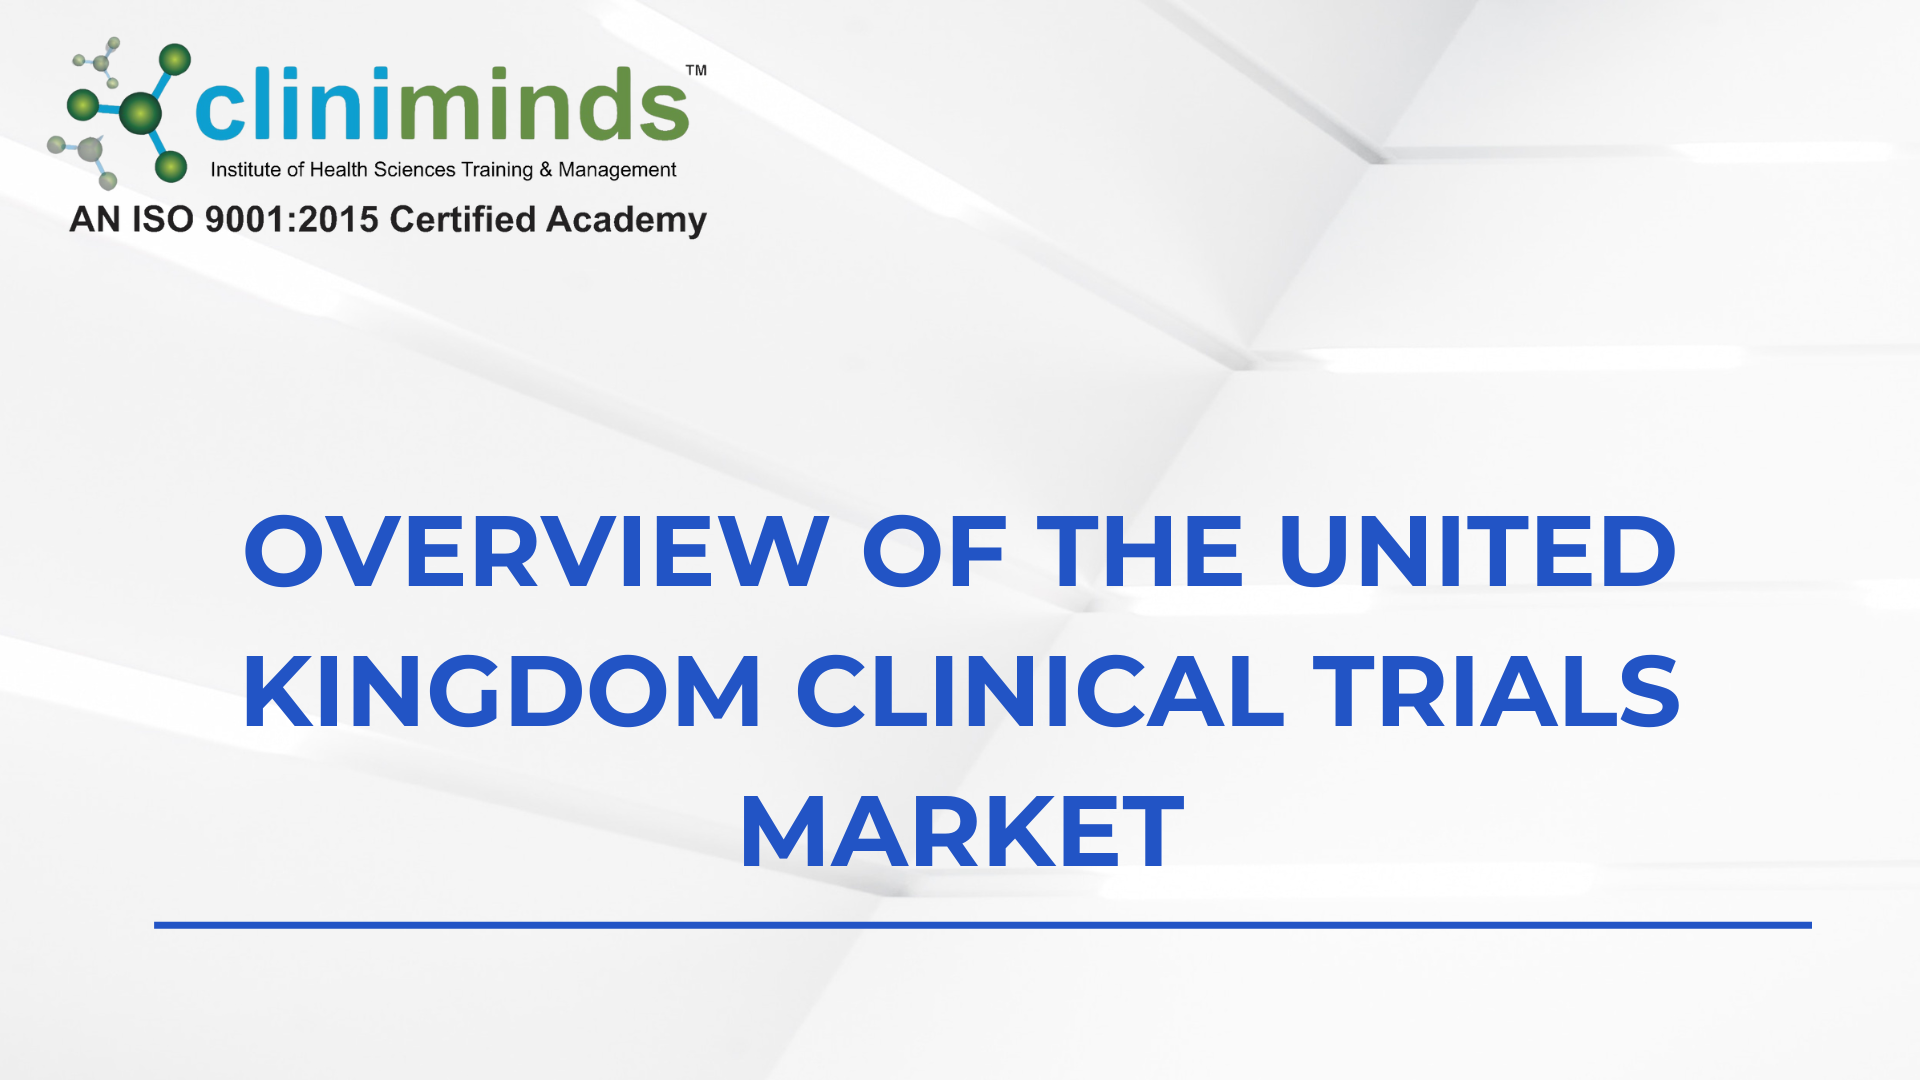 Overview of United Kingdom Clinical Trials Market